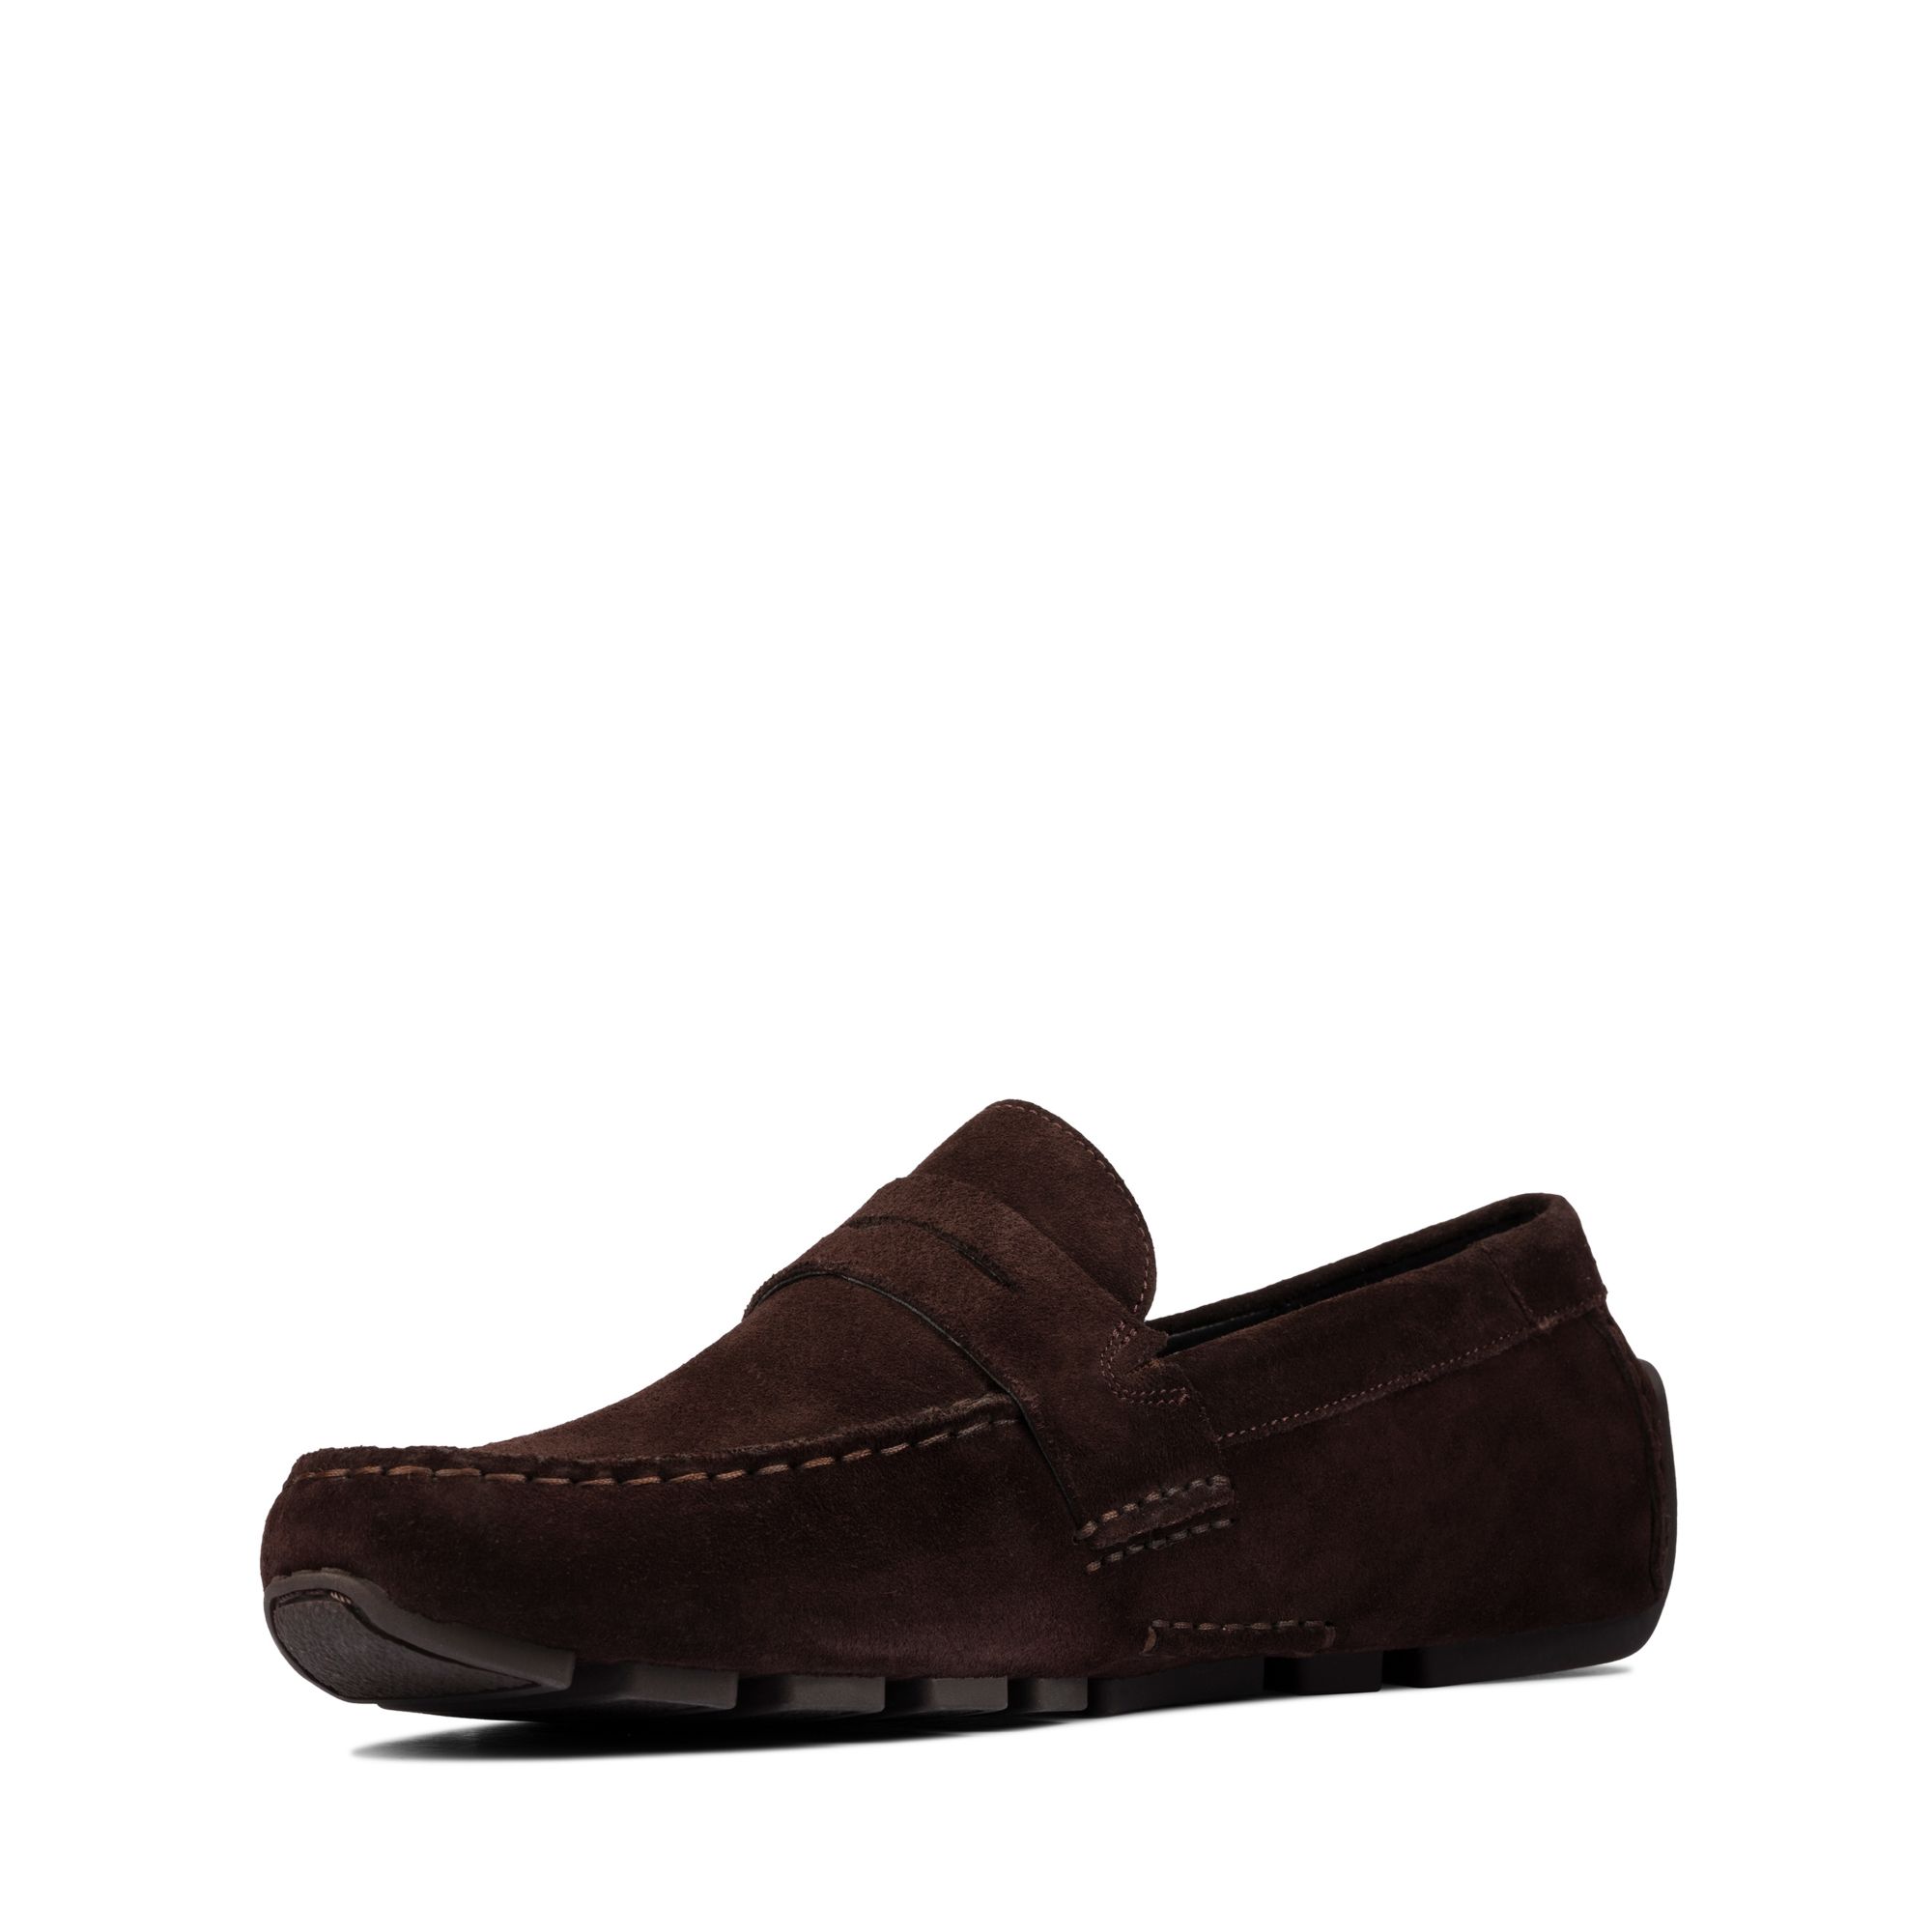 Clarks Oswick Penny Loafers, Dark Brown Suede, 44.5